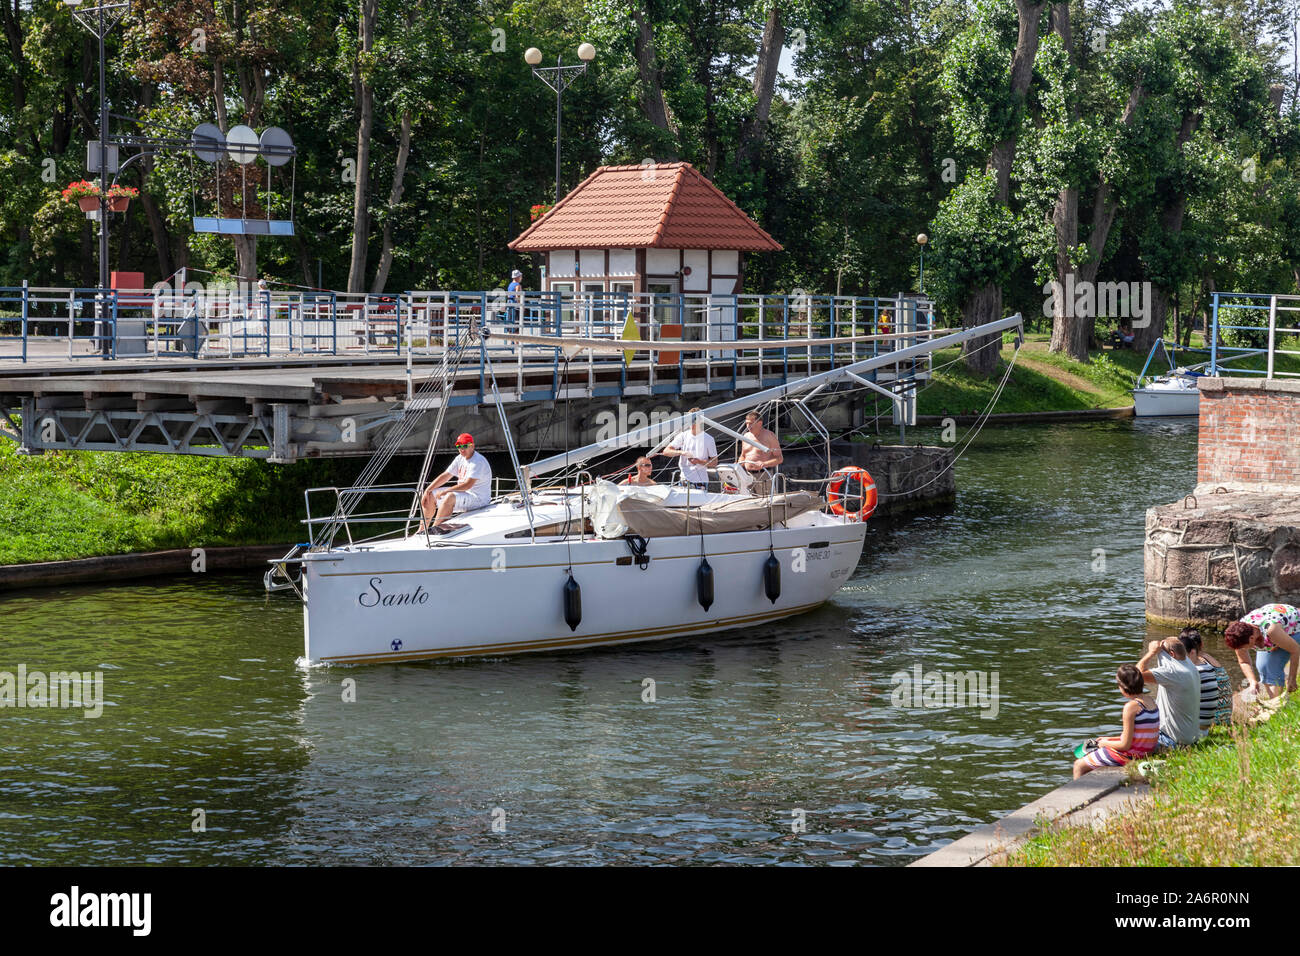 Gizycko, the sailboat flows under the historic open swing bridge on the Gizycko Channel, Poland Stock Photo